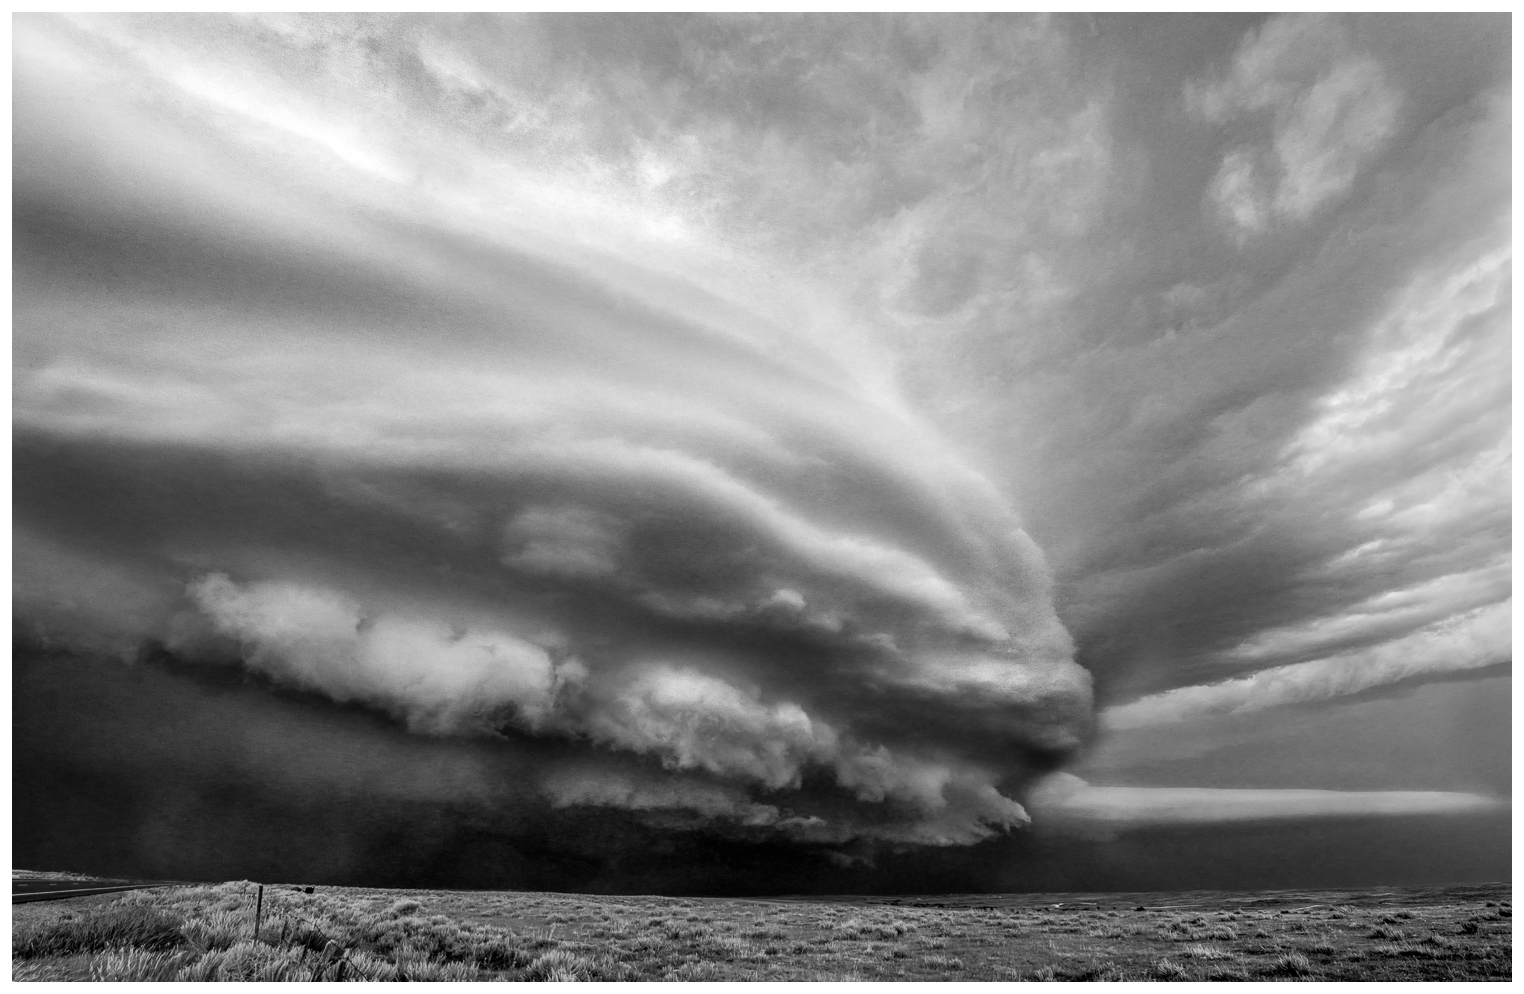 Supercell in the Texas Panhandle